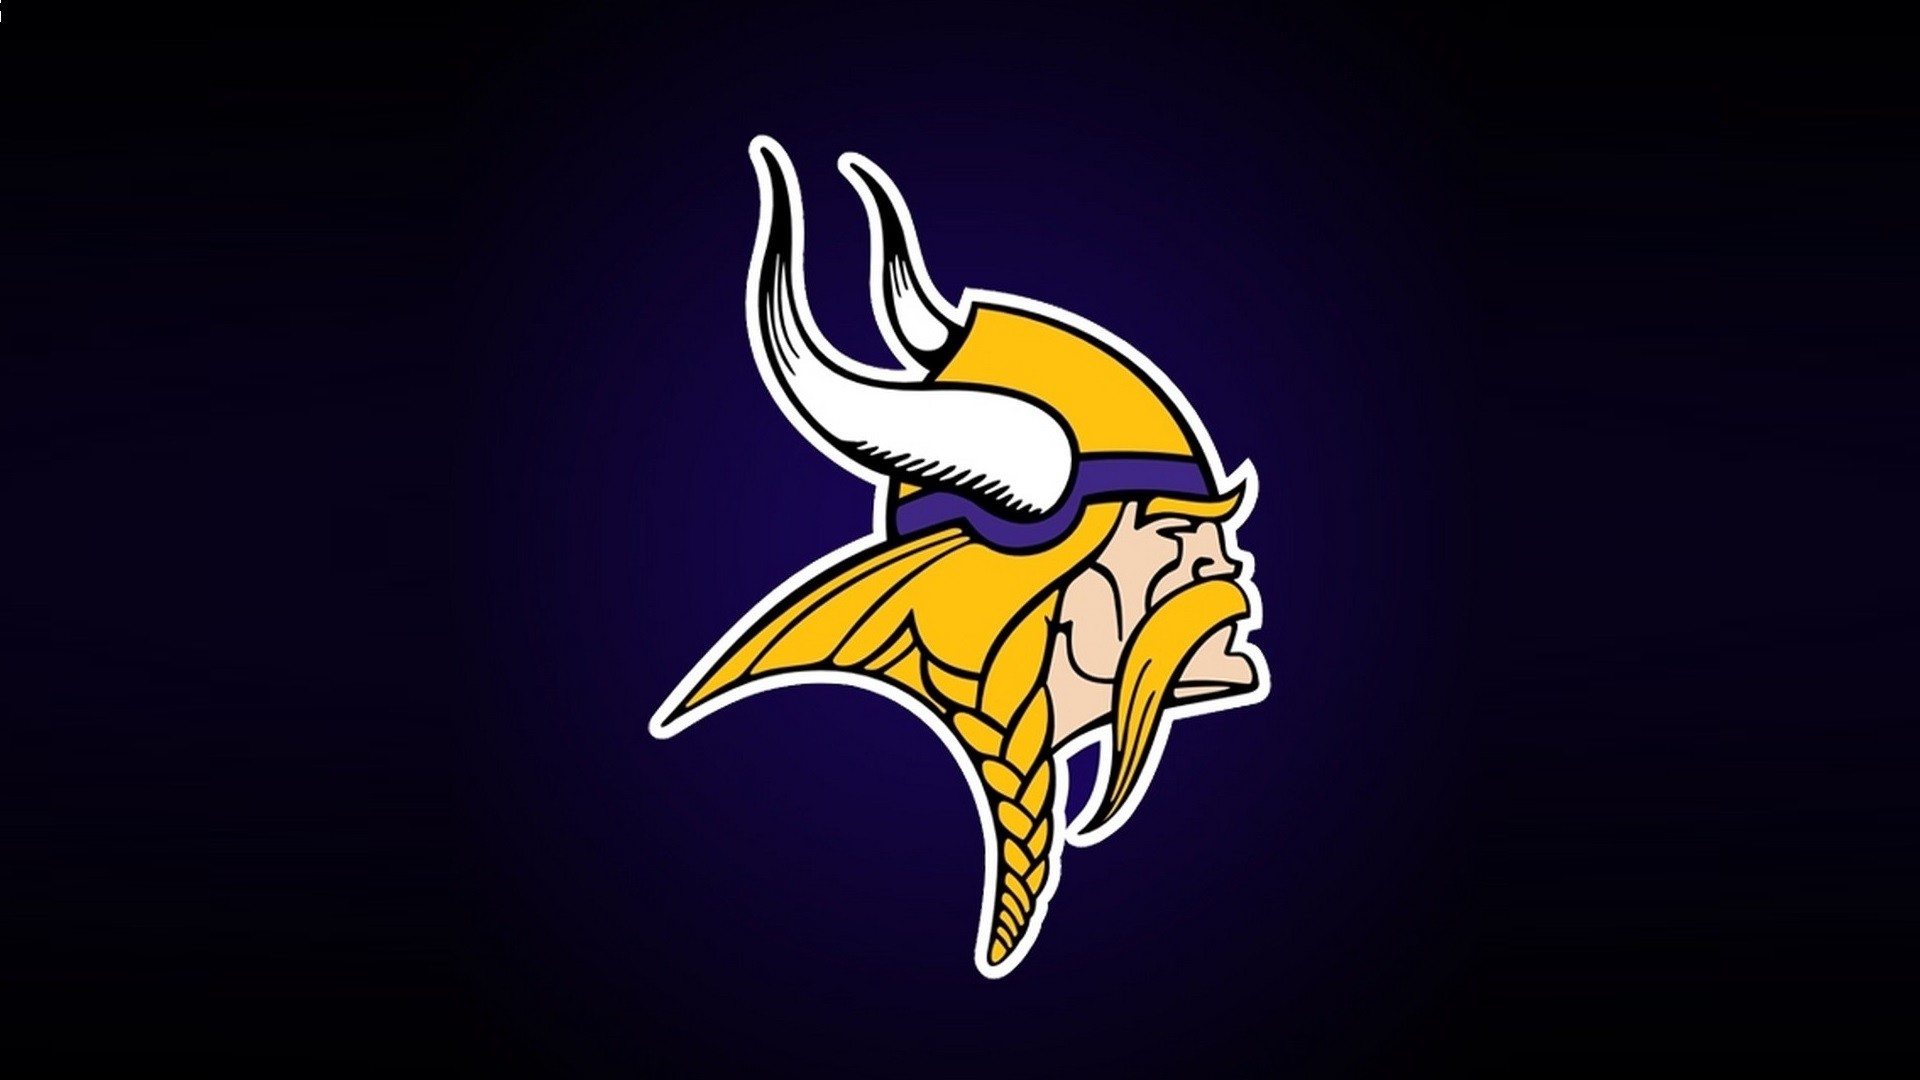 Minnesota Vikings NFL Wallpaper HD With high-resolution 1920X1080 pixel. You can use this wallpaper for your Mac or Windows Desktop Background, iPhone, Android or Tablet and another Smartphone device